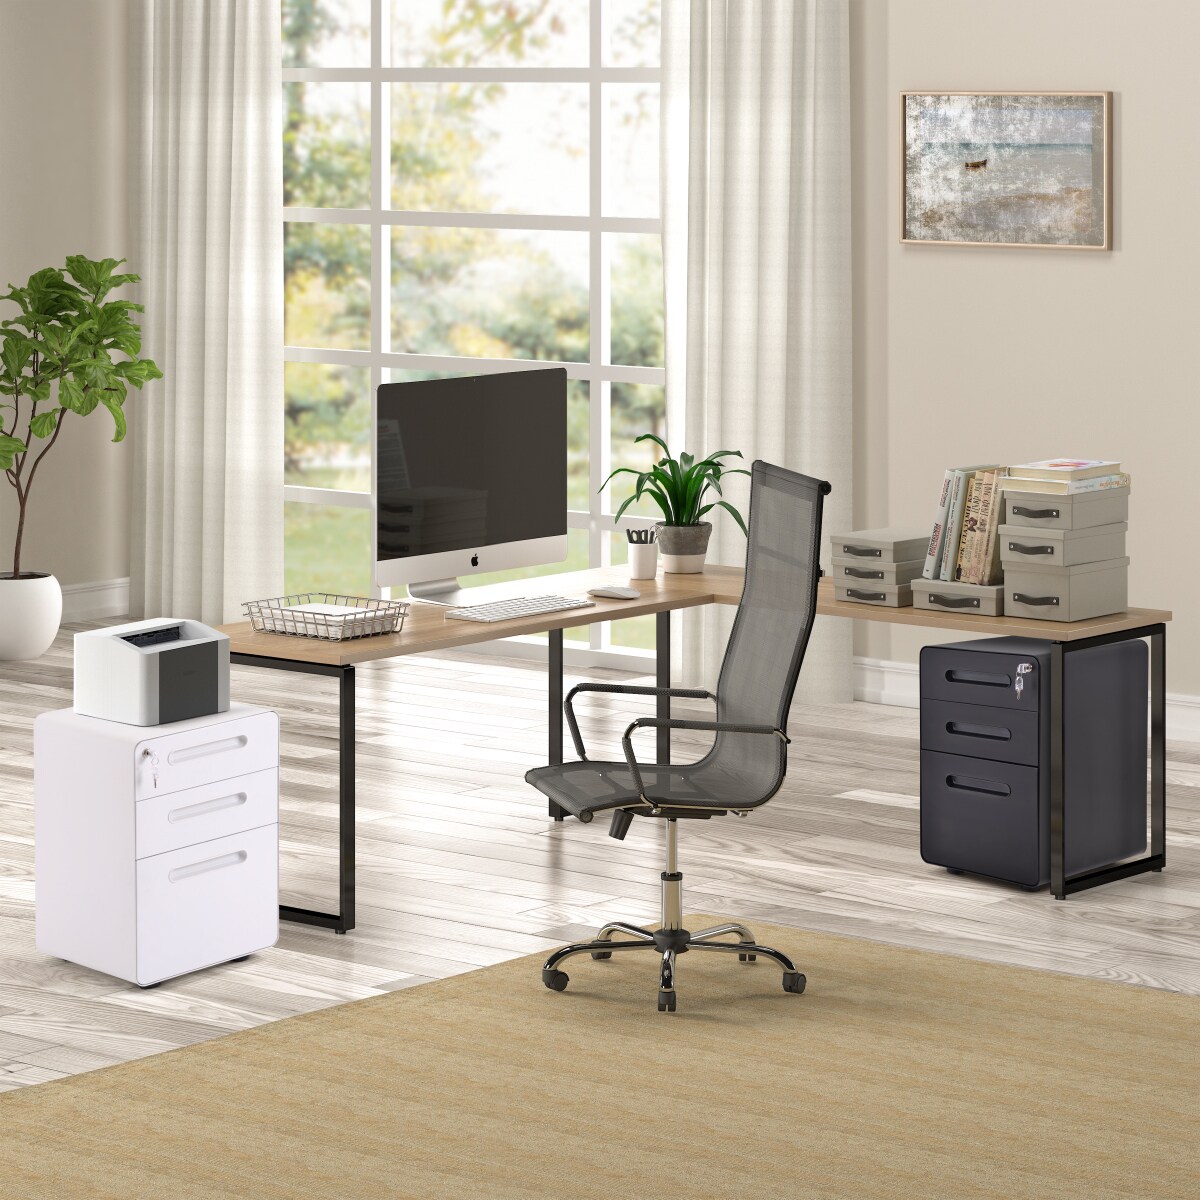 Sumyeg Filing Cabinet White 3-drawer 14.9-in File Cabinet In The File 